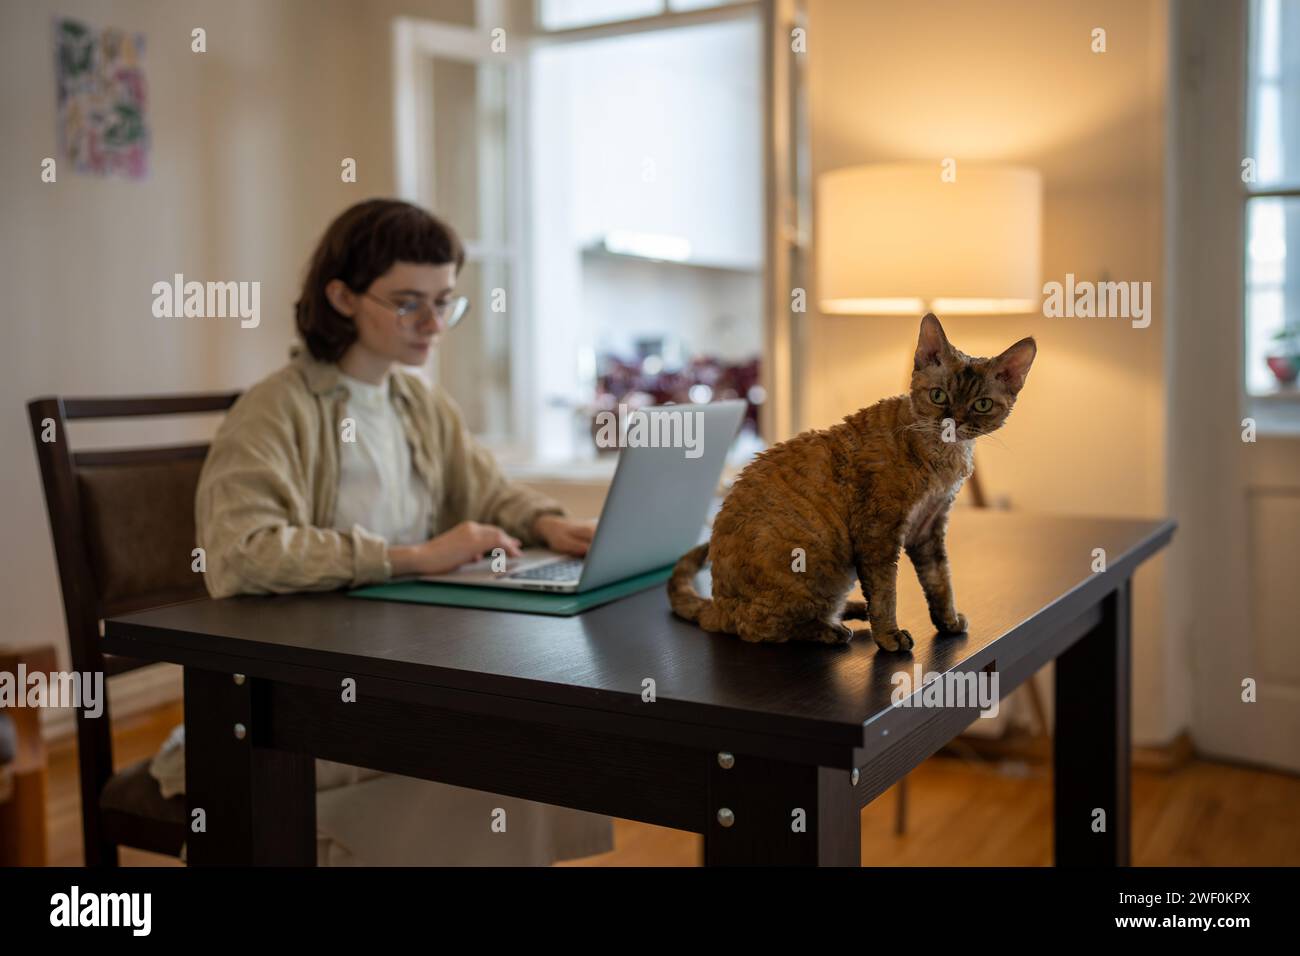 Breed cat Devon rex sitting on table, wants playing while pet owner works on computer, studies Stock Photo